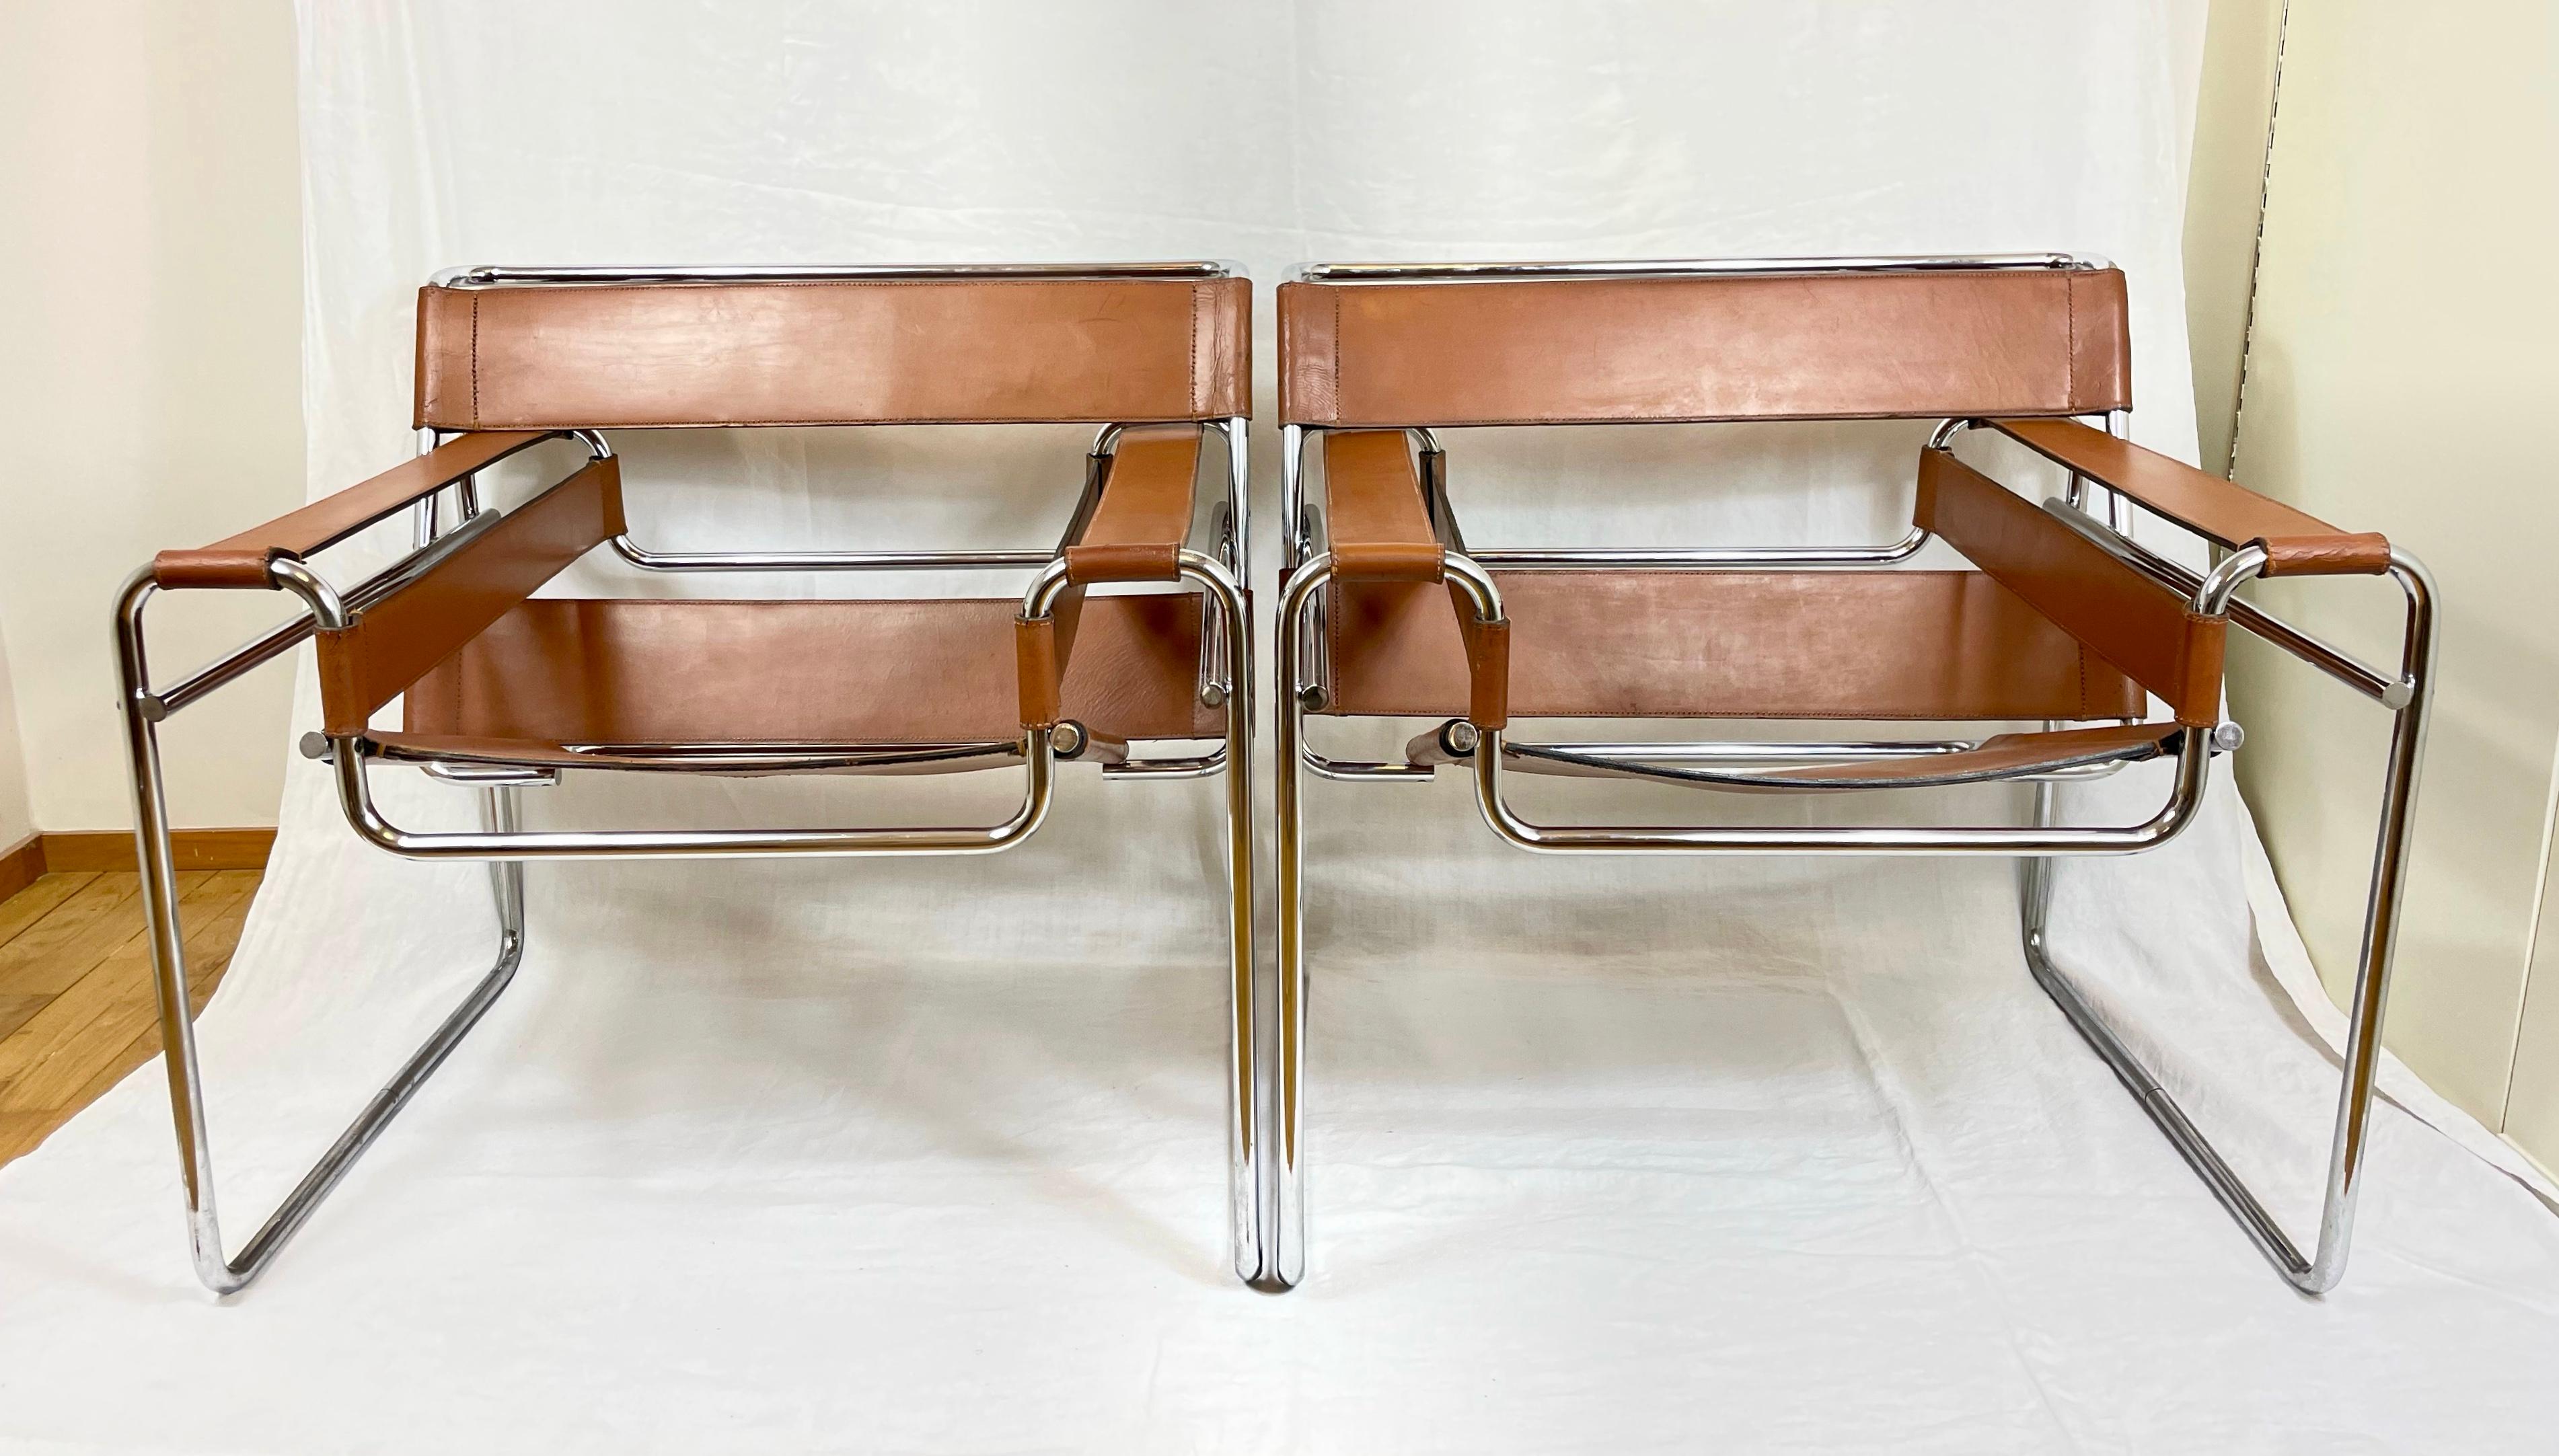 A beautiful pair of Wassily lounge chairs by Marcel Breuer (1902 - 1981).
The iconic Marcel Breuer chair originates back to 1925, this pair were manufactured in the early 1960s.
Made from chrome and saddle leather with the rich tan colour of the